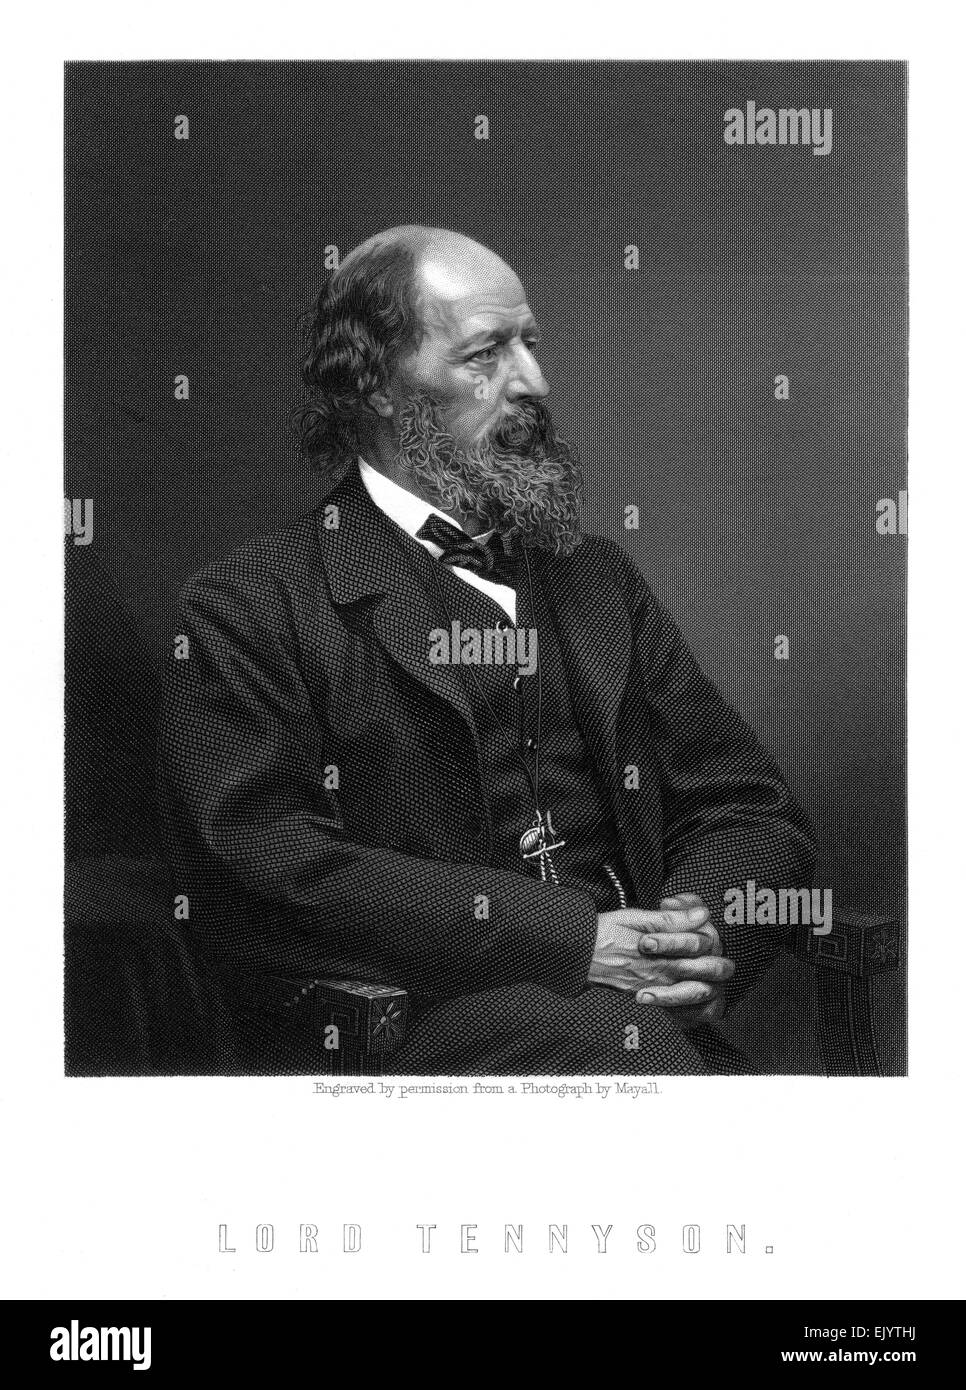 engraved portrait illustration of Alfred, Lord Tennyson (1809-1892) circa 1882, was Poet Laureate of Great Britain and Ireland during much of Queen Victoria's reign and remains one of the most popular British poets. Stock Photo